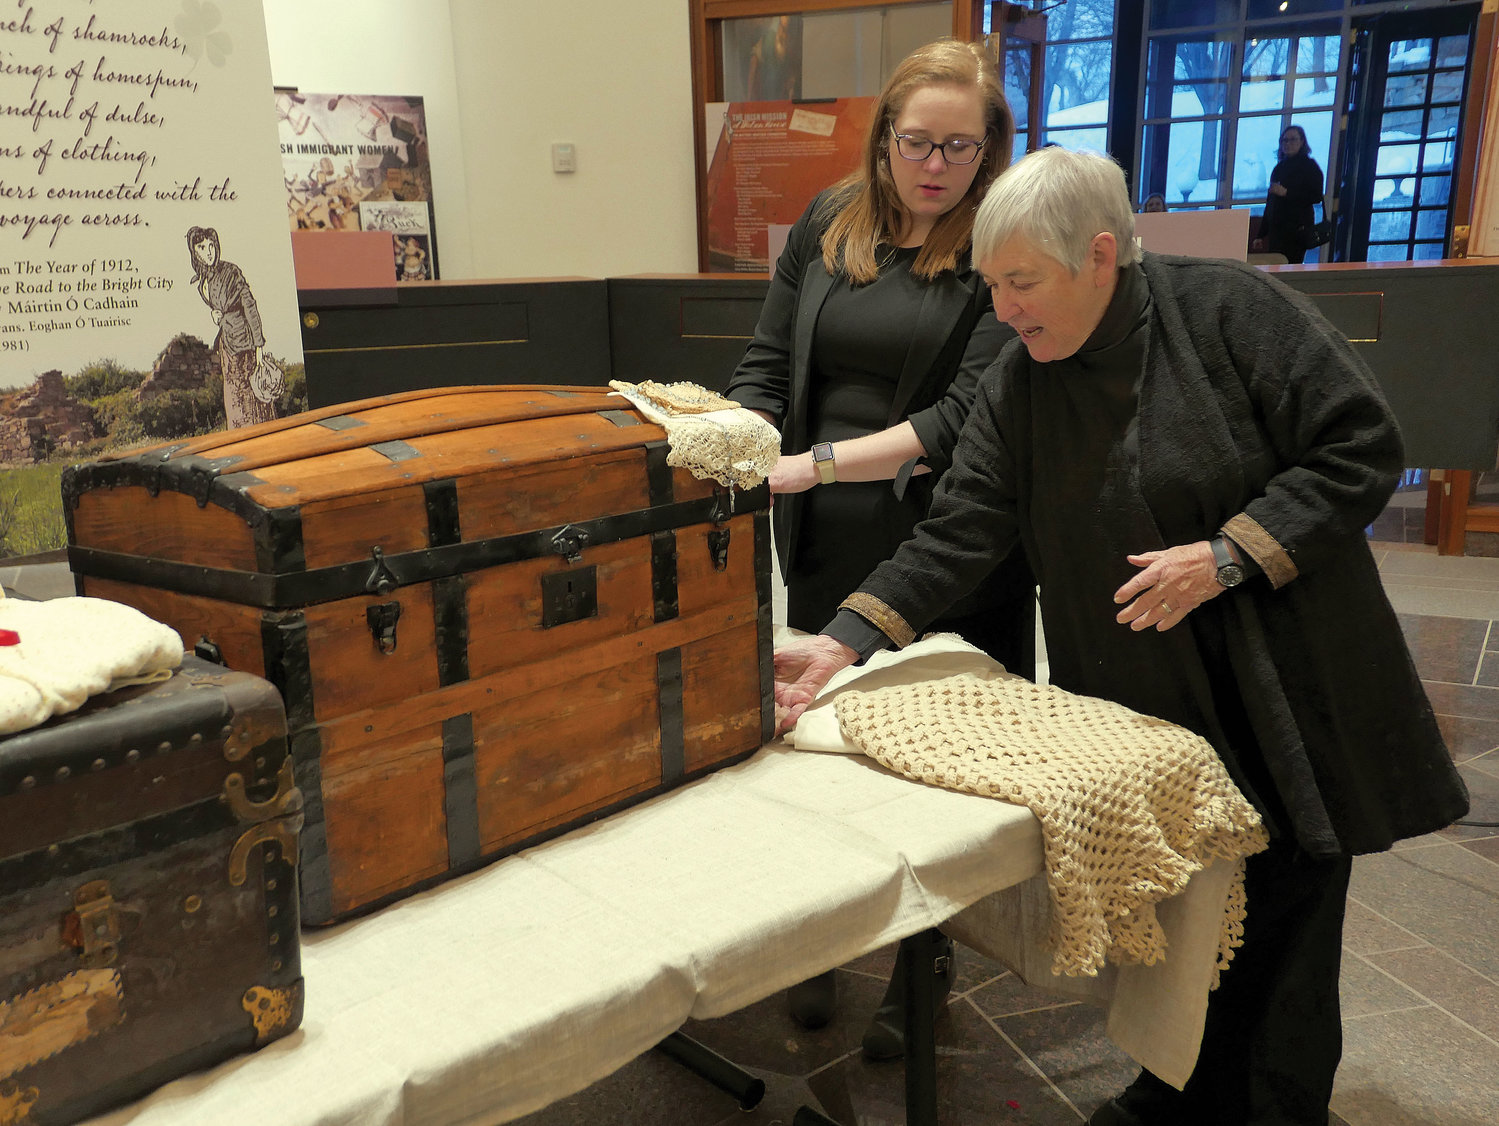 A photo exhibit of the Irish Mission at Watson House opened March 7 in the Archives Building at St. Joseph’s Seminary in Dunwoodie. Dr. Maureen Murphy, featured speaker at the exhibit opening touches a trunk used by her paternal grandmother, Martha Thompson, when she emigrated from Ireland in 1900. With Dr. Murphy is Kate Feighery, archdiocesan archivist.